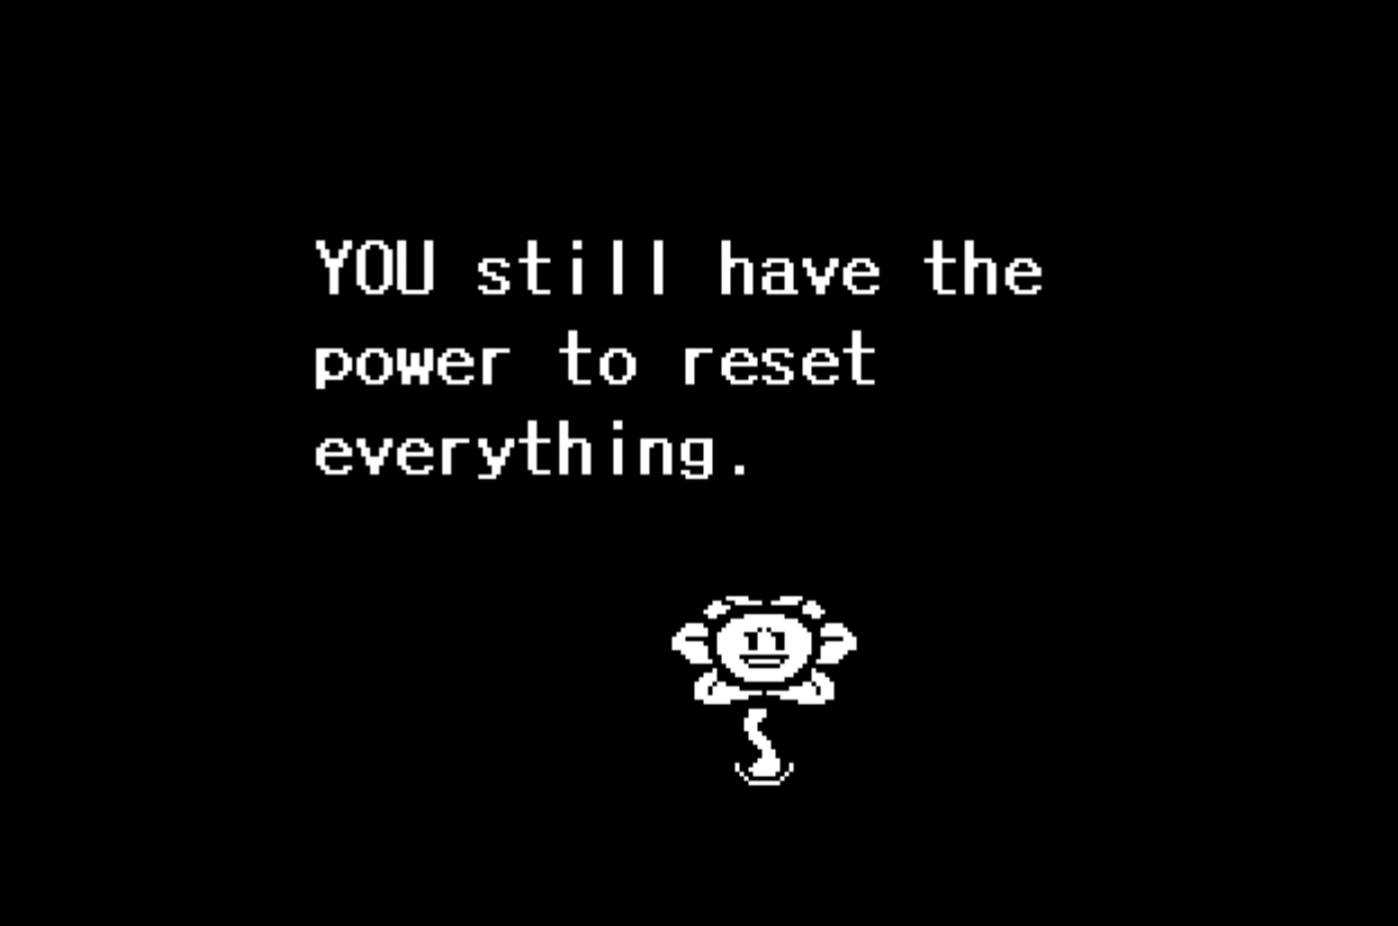 Undertale screenshot of flowey saying "you still have the power to reset everything"